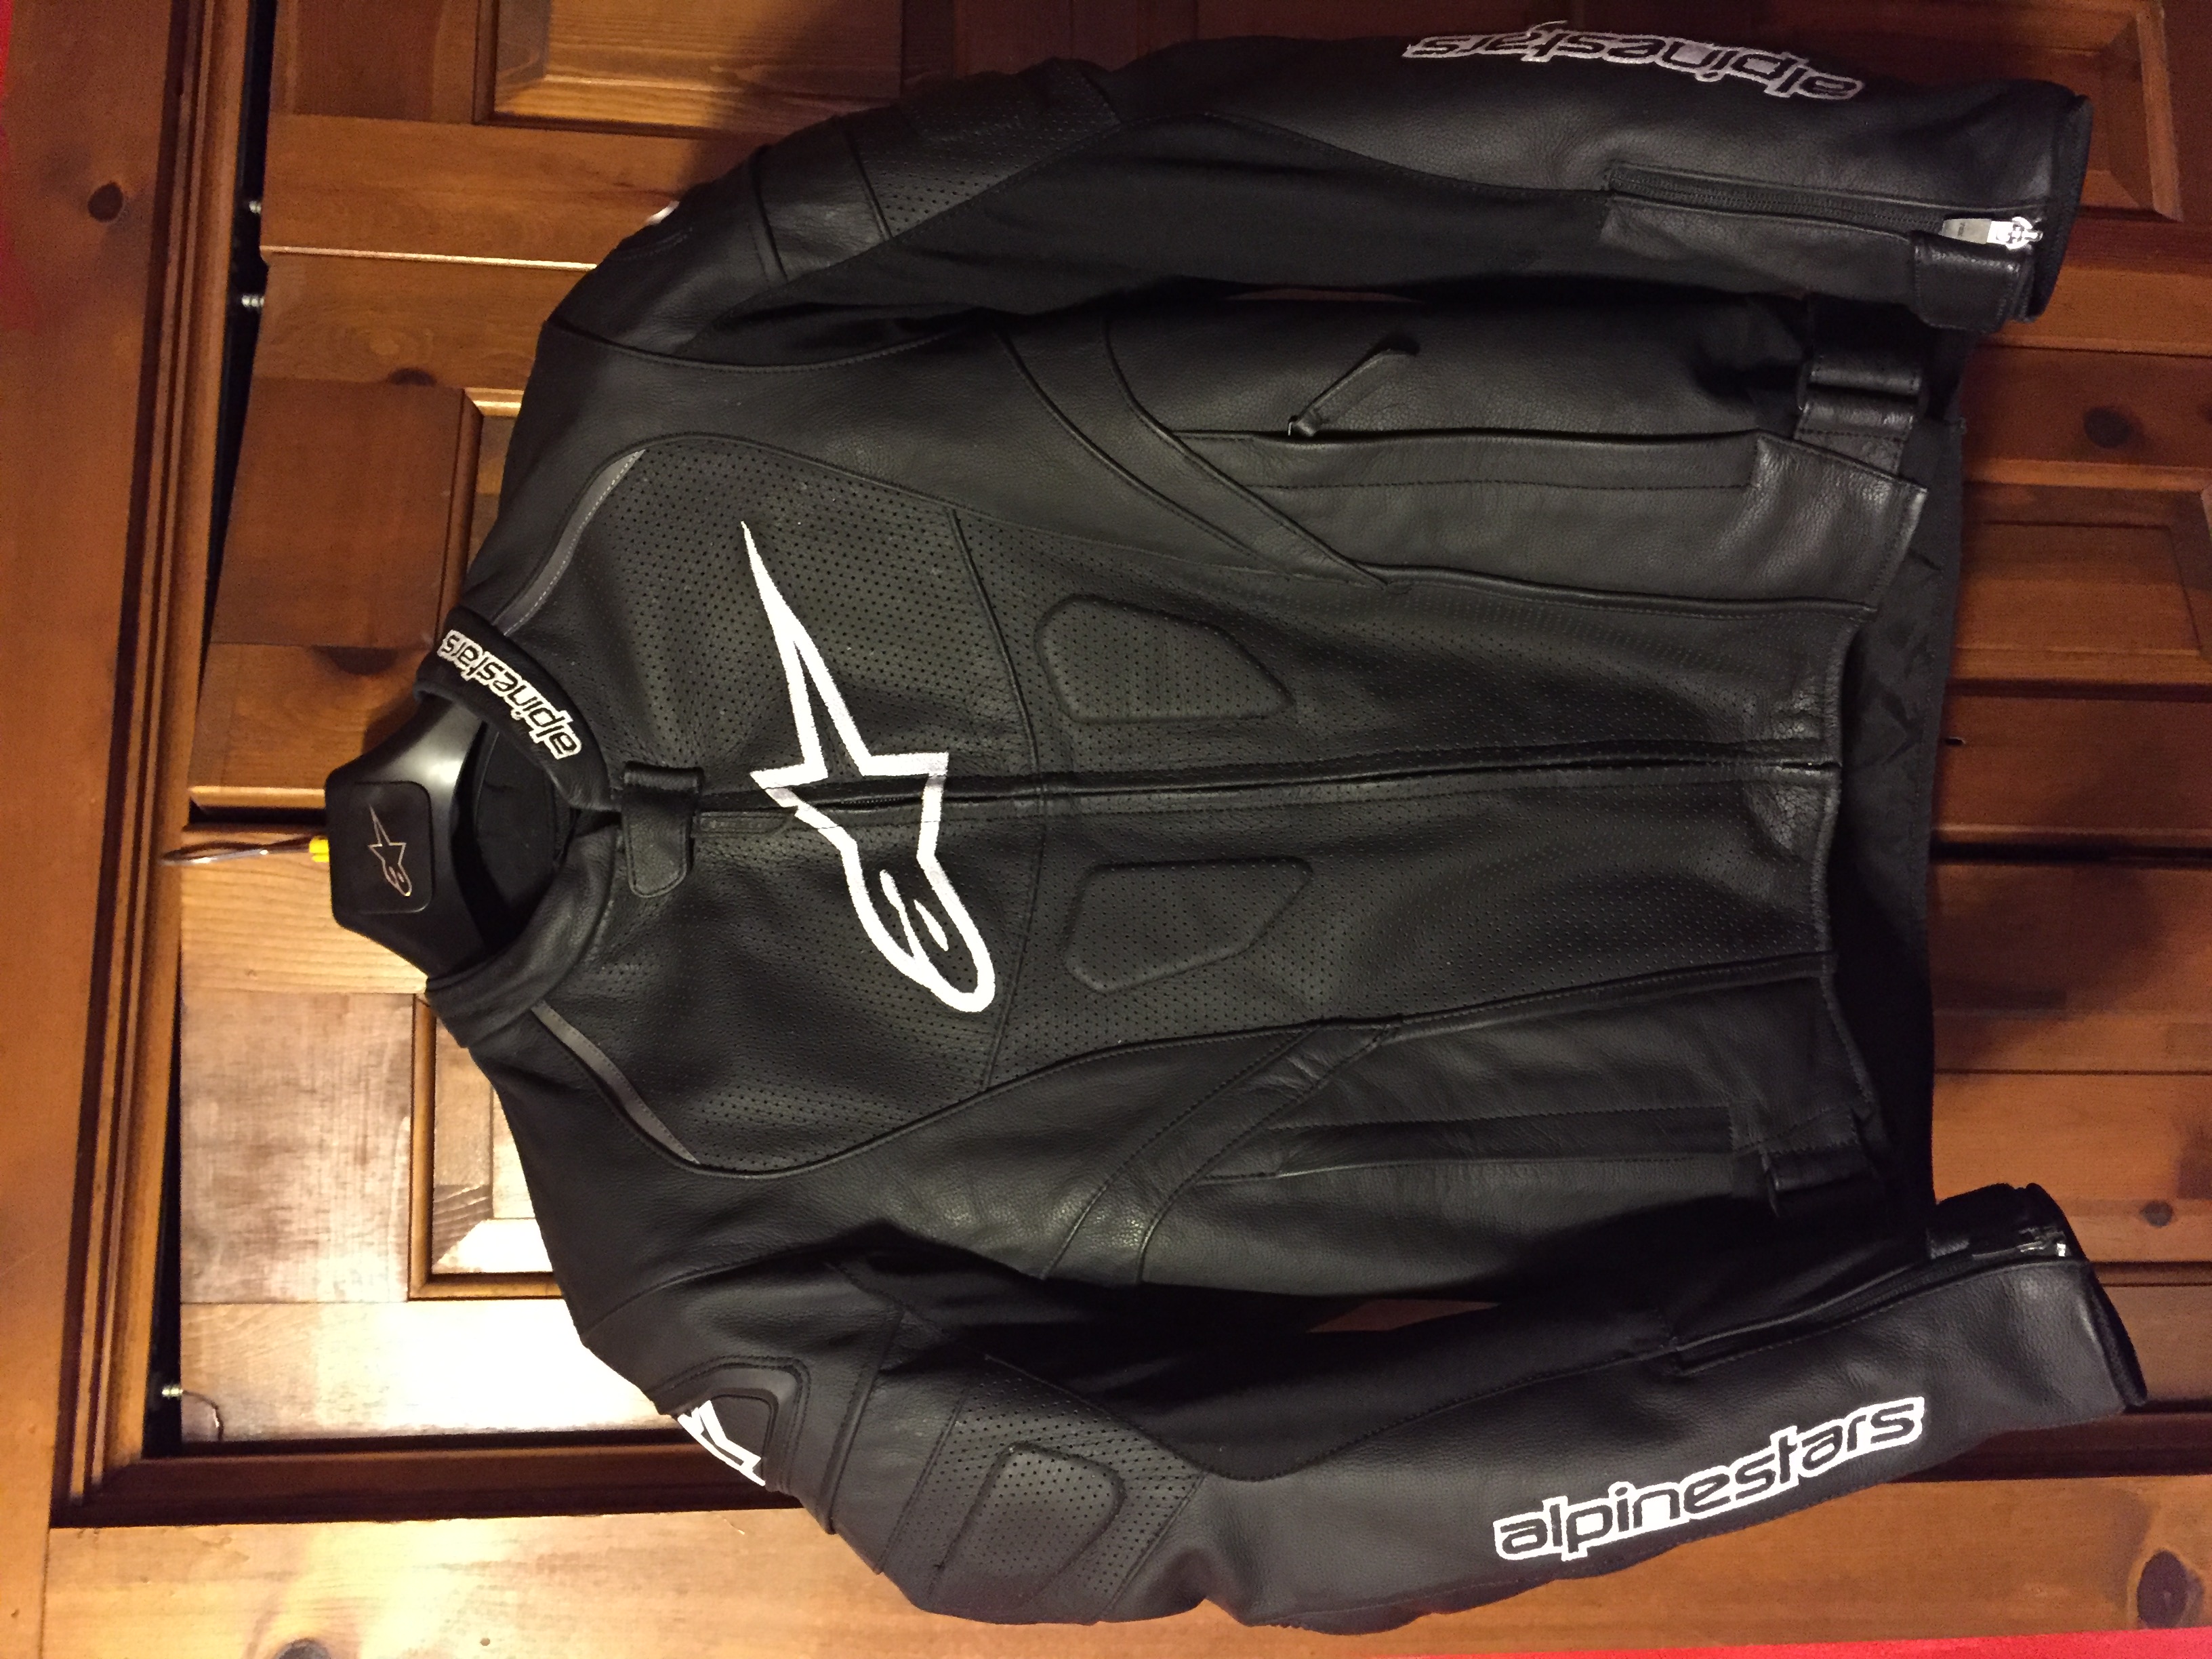 Viewing Images For Alpinestars GP Plus R Perforated :: MotorcycleGear.com